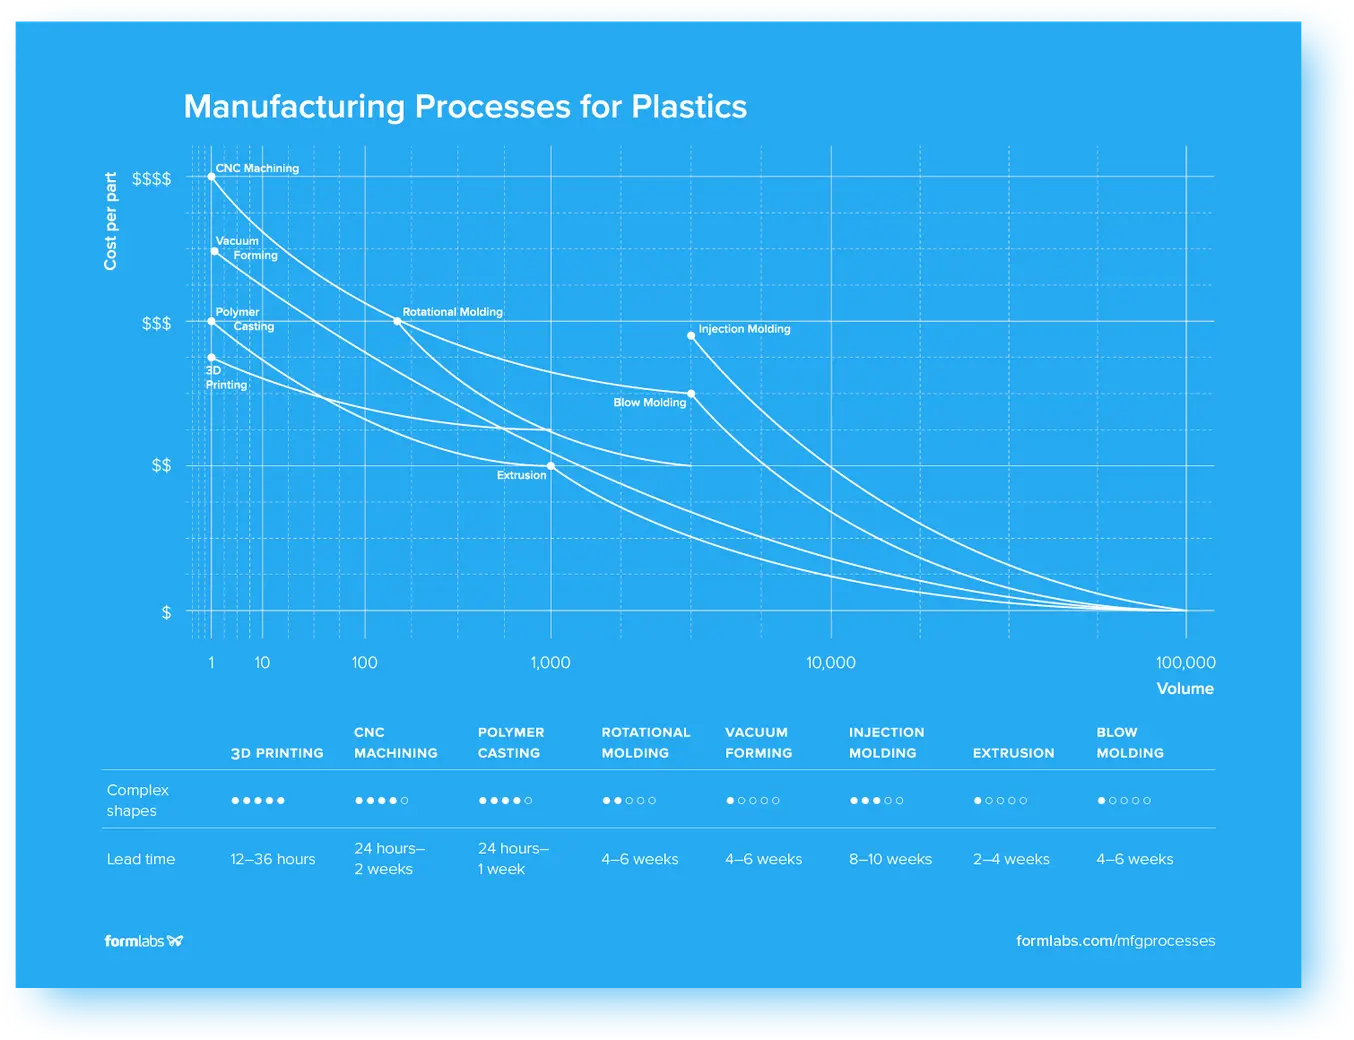 Manufacturing processes for plastics - Infographic - 3D Printing, CNC Machining, Polymer Casting, Rotational Molding, Vacuum Forming, Injection Molding, Extrusion, Blow Molding